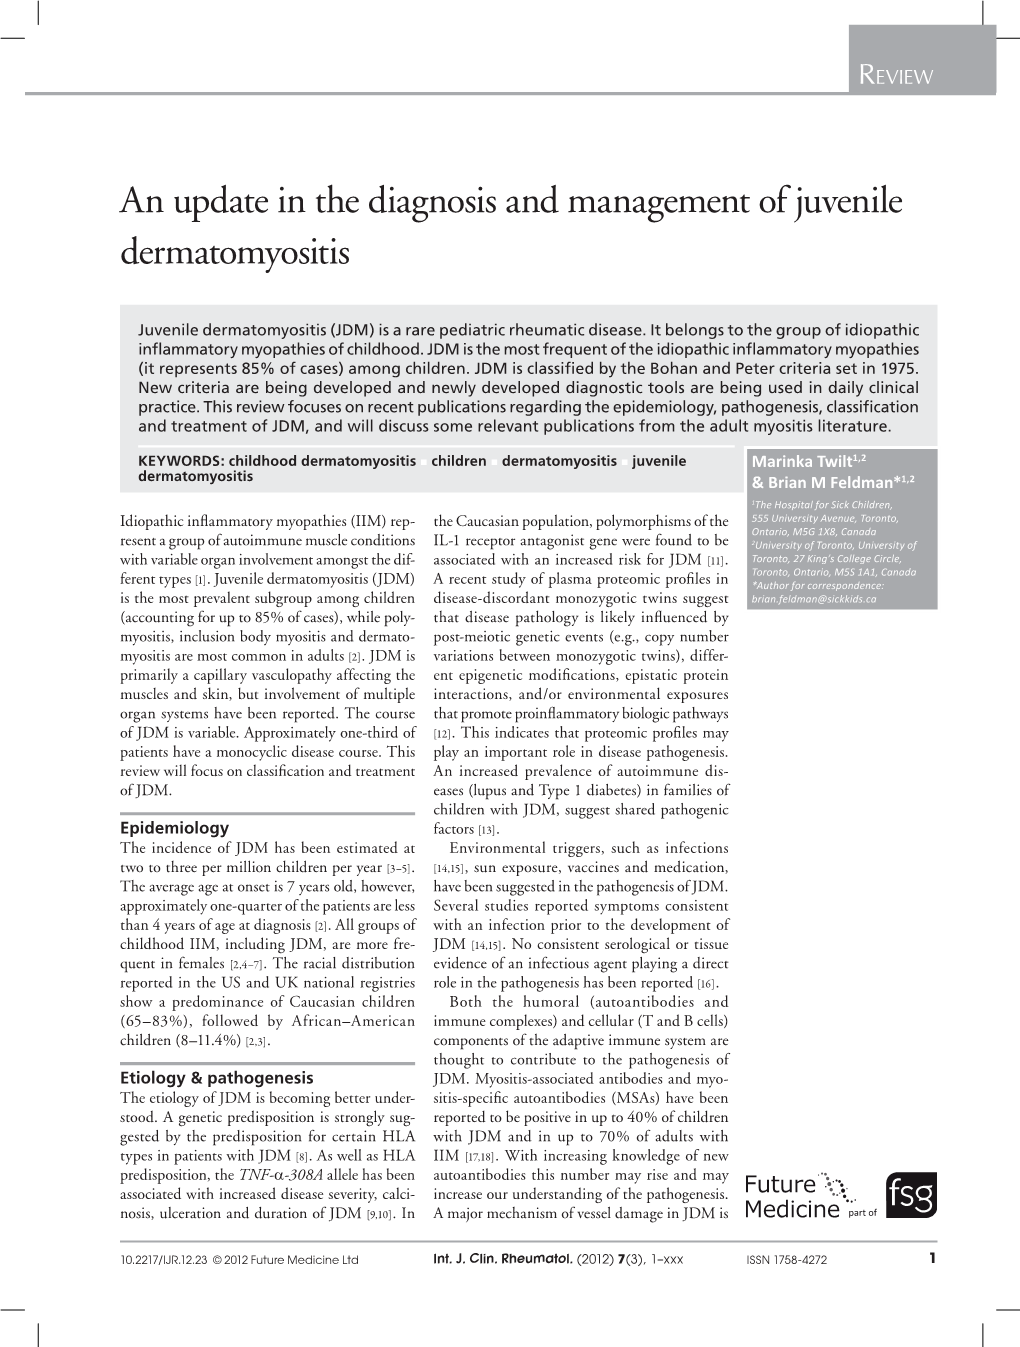 An Update in the Diagnosis and Management of Juvenile Dermatomyositis